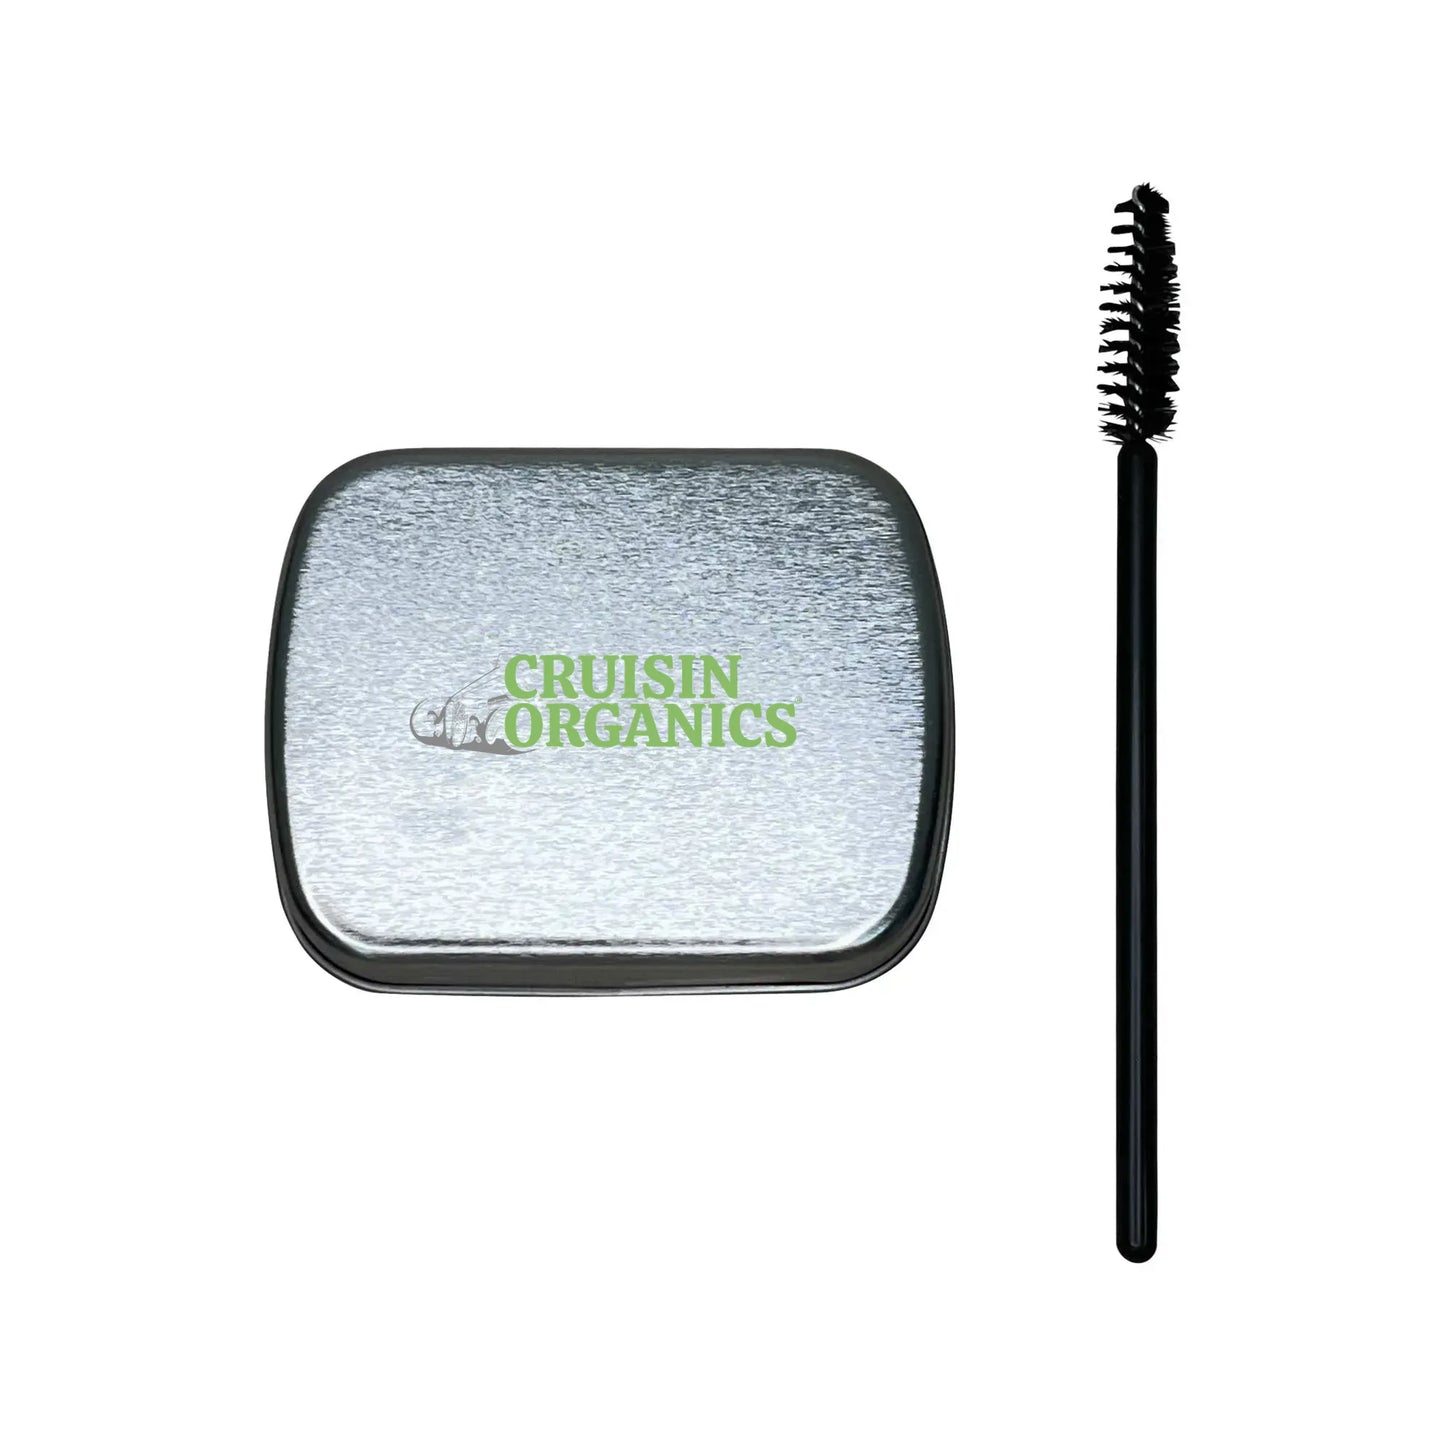 Our Cruisin Organics brow soap is the best, clearest formula on the market, with an intense hold that will last all day. Using organic olive oil, our brow soap holds fussy brows in place and provides a clean finish you will love. Our brow soap is specially formulated so that you can get an extra-strong, all-day brow hold without leaving a white or shiny residue behind. Instantly transform the thinnest brows into fluffy and full looks!